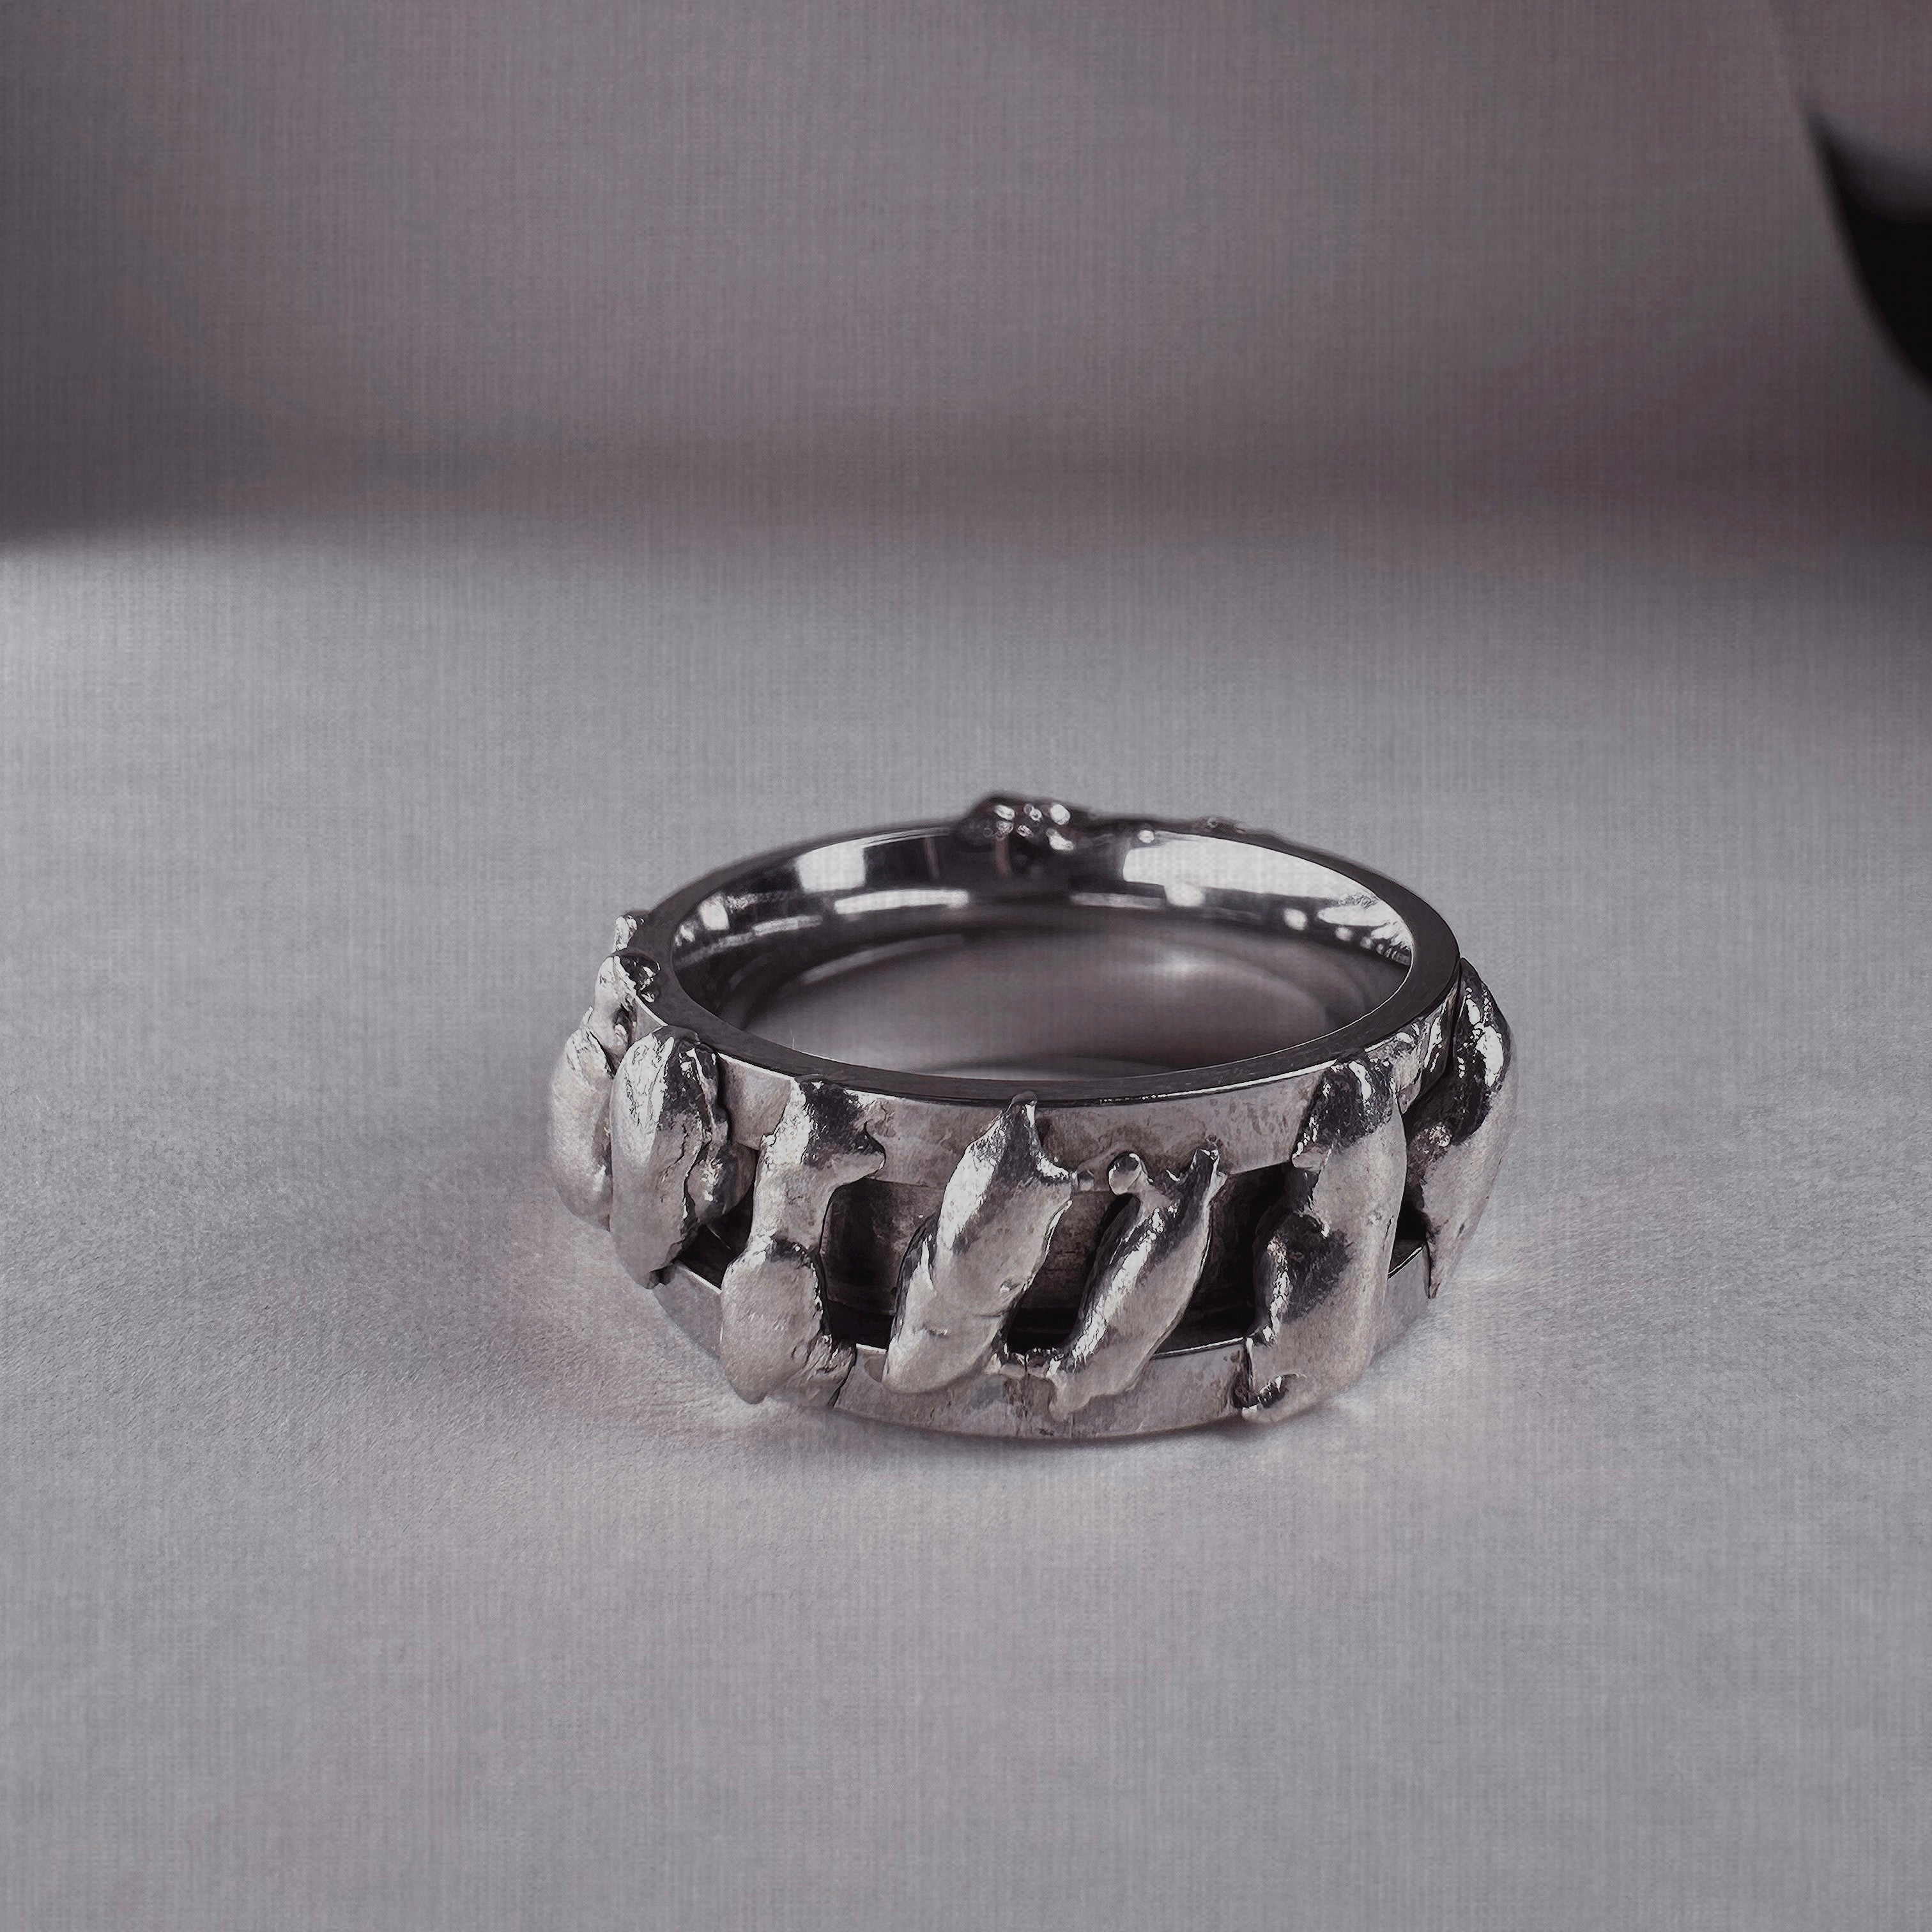 Fixation Ring (size 8)